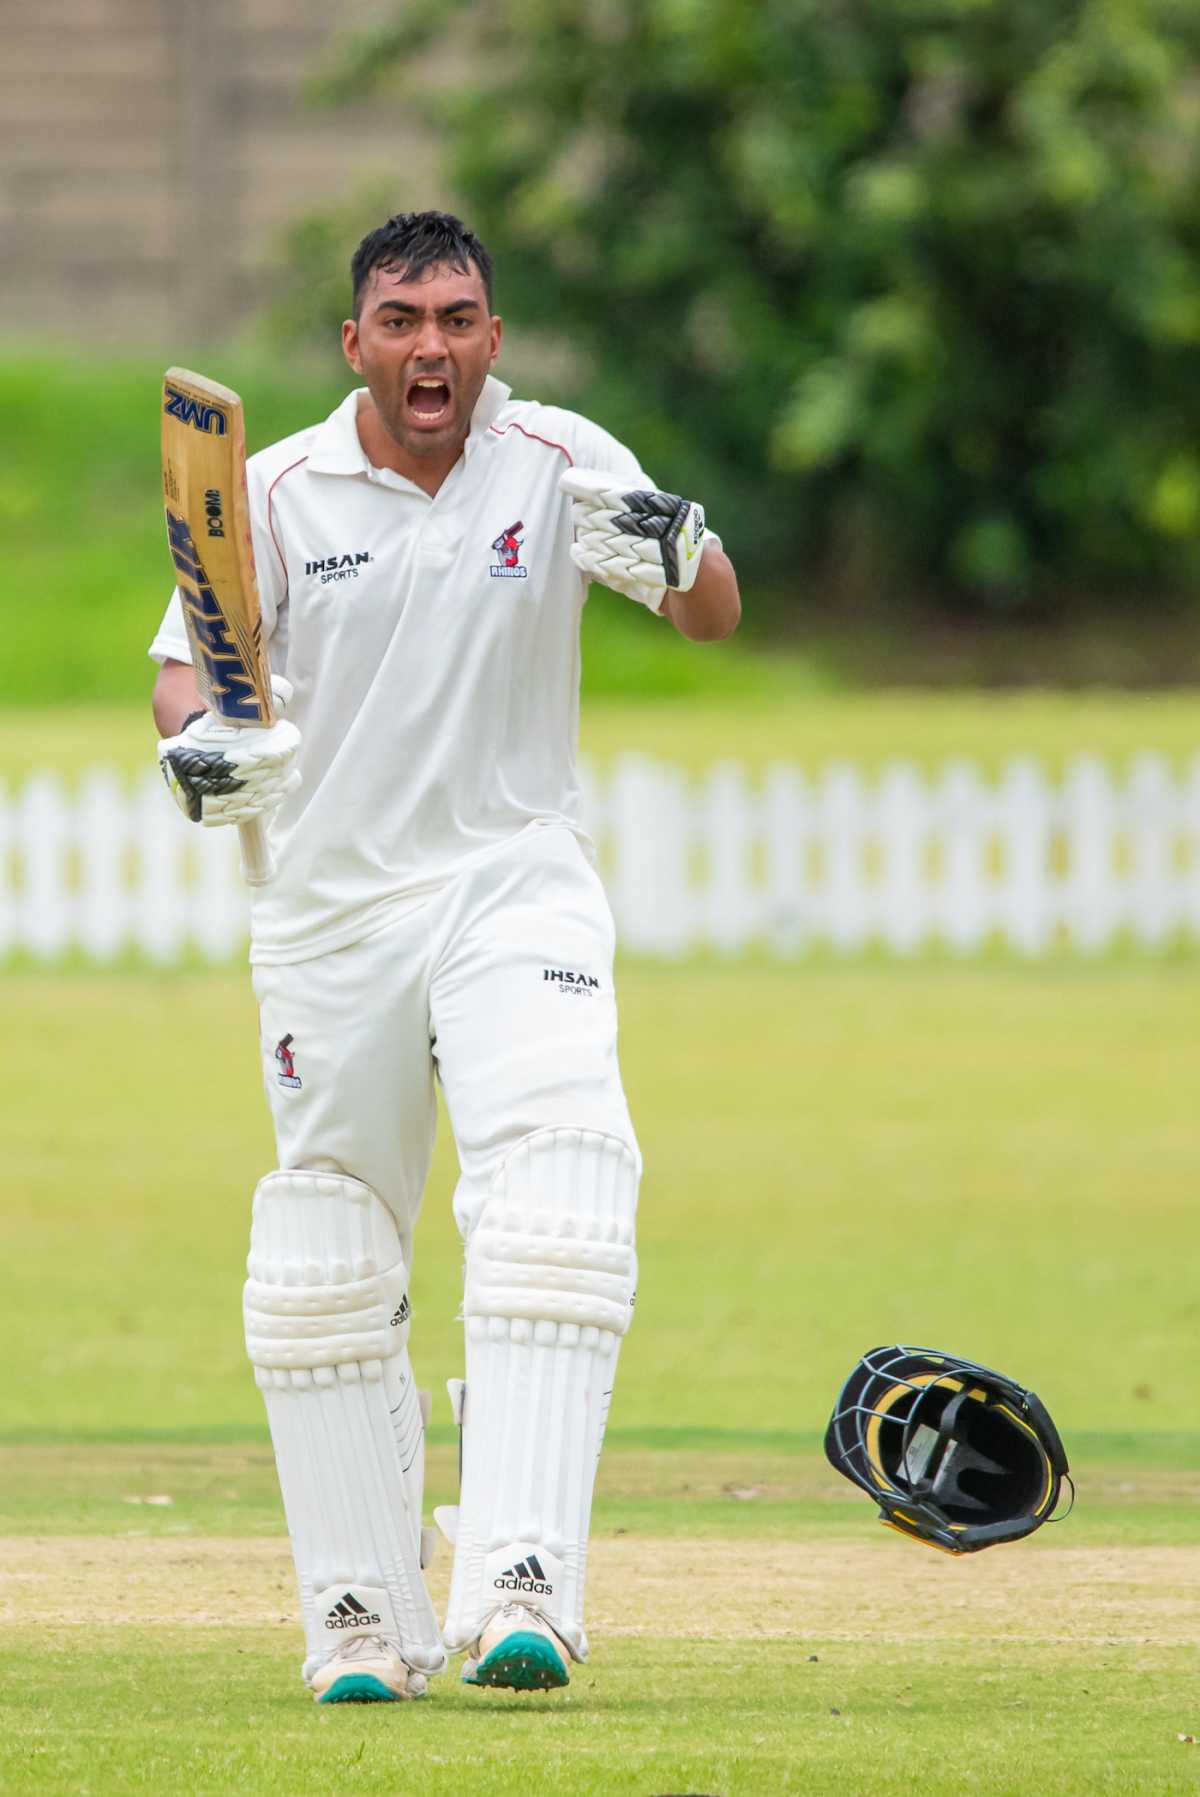 Antum Naqvi broke a number of Zimbabwe cricket records on his way to an unbeaten 300